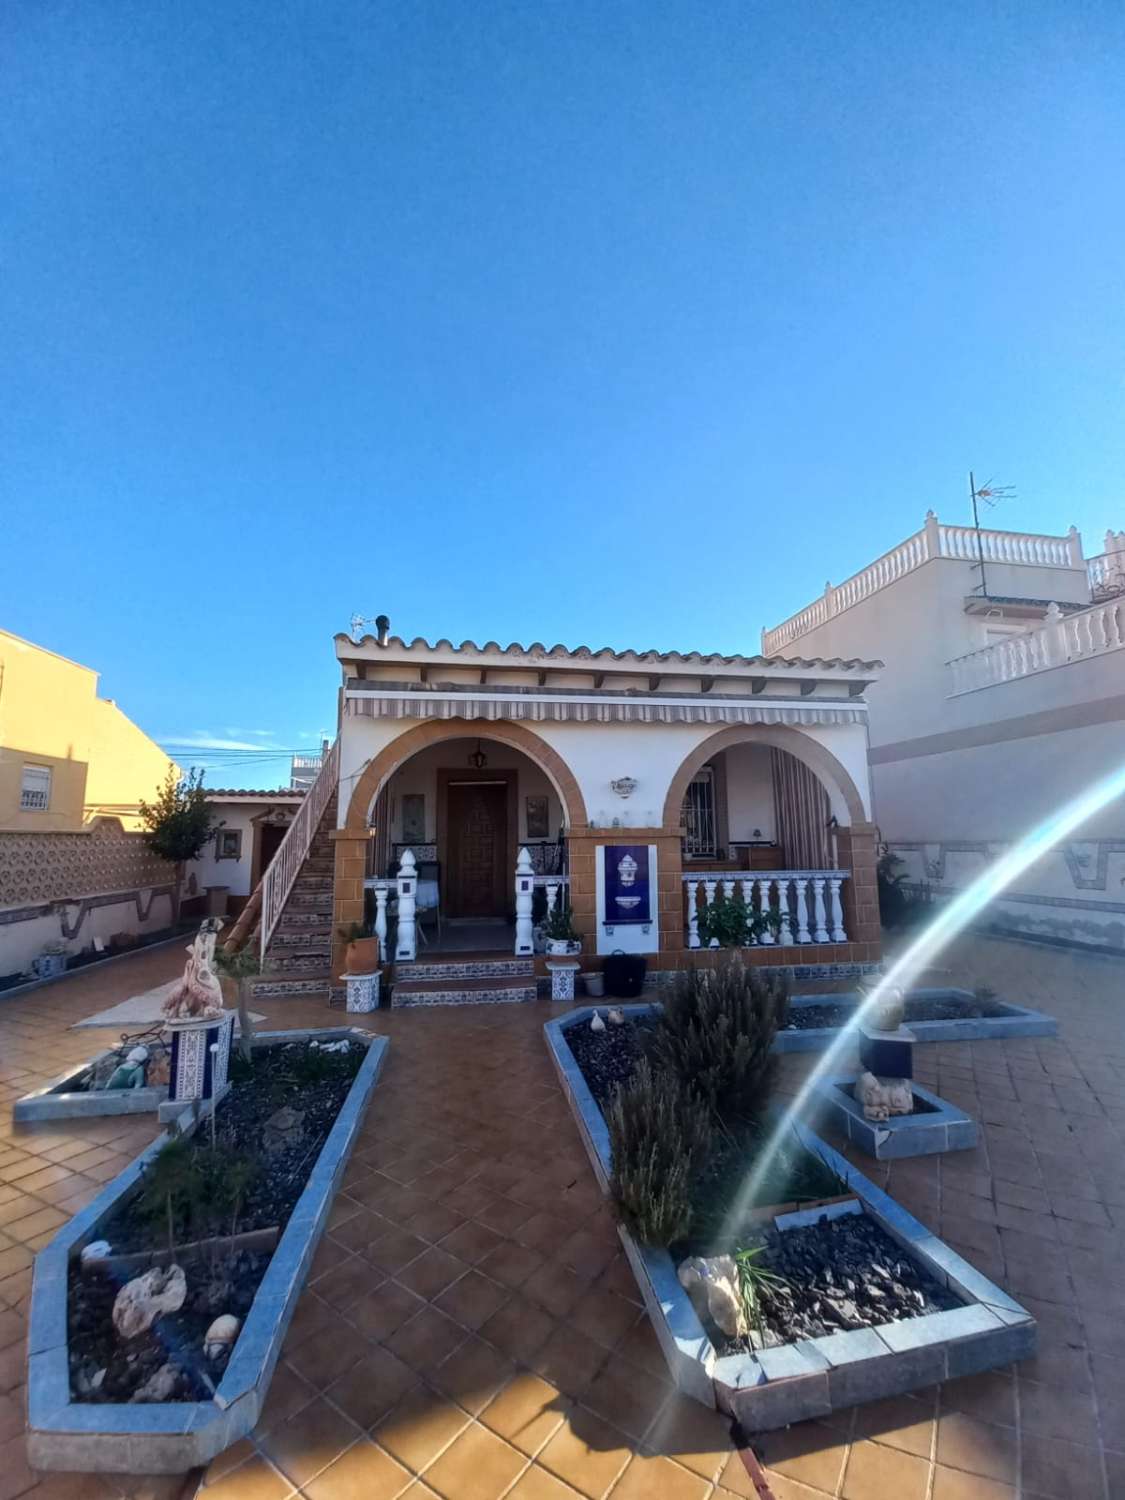 Detached villa with pool in Torrevieja (Costa Blanca South)